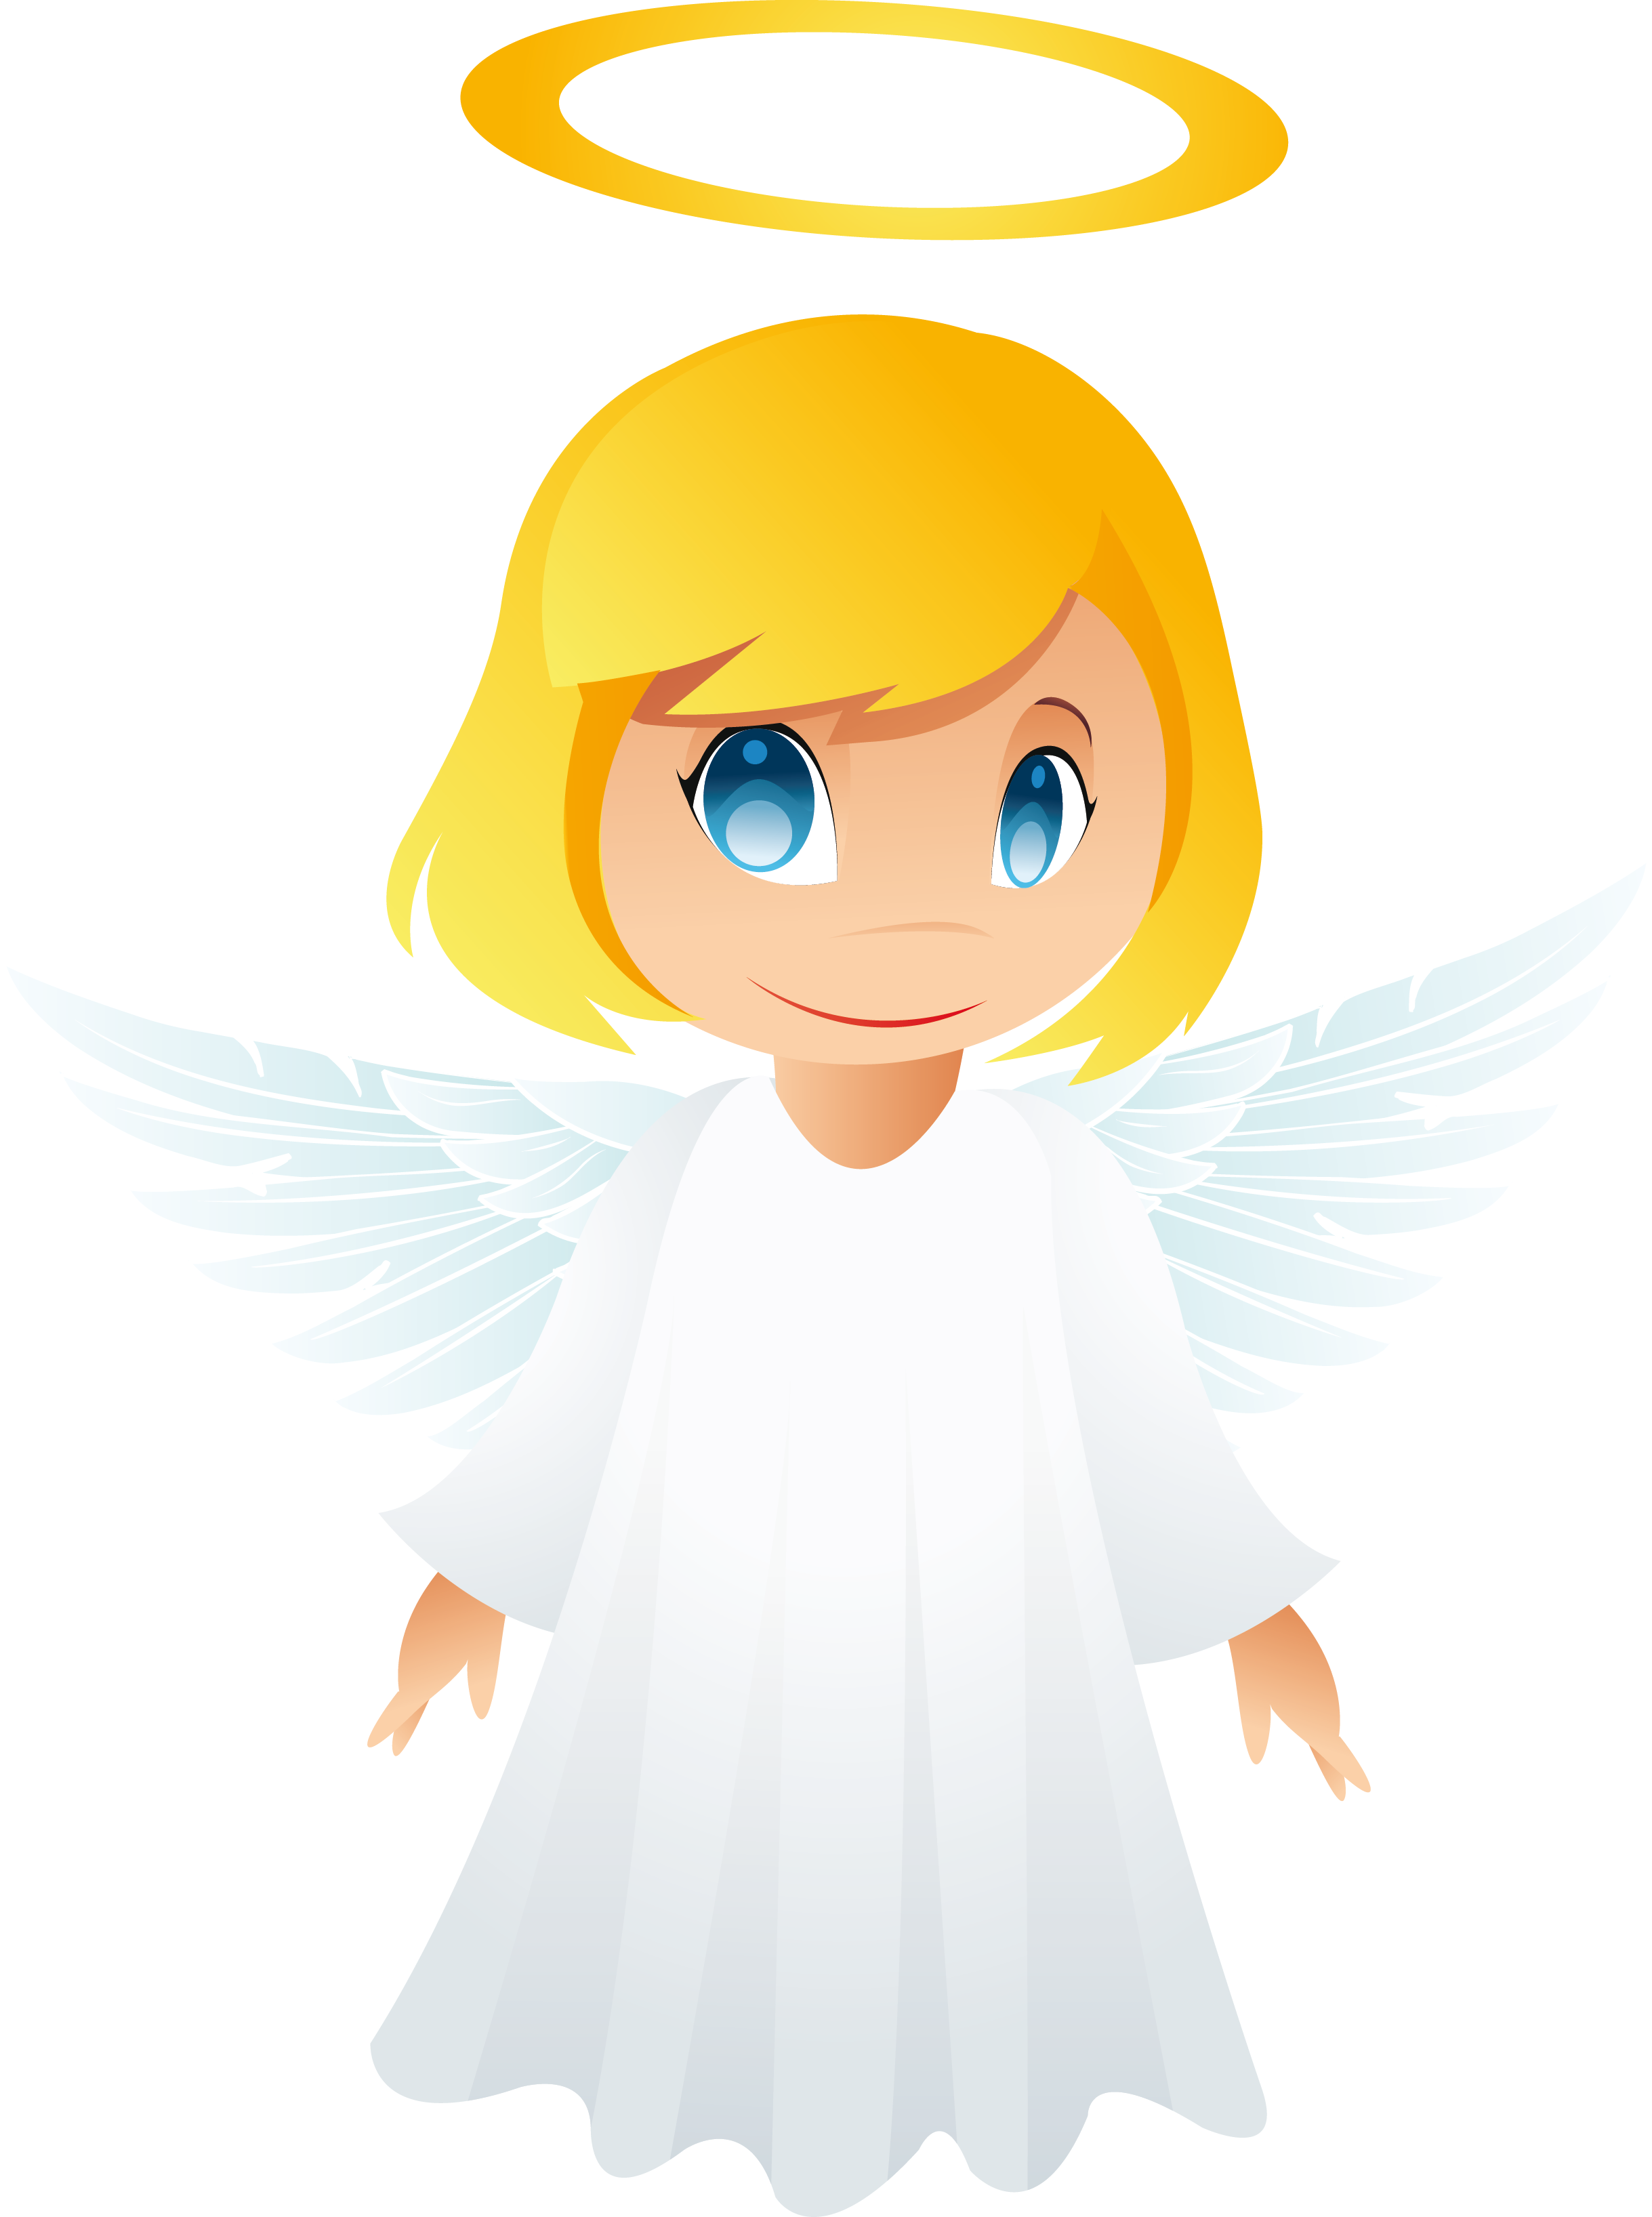 Cartoon Angel Images Free - ClipArt Best